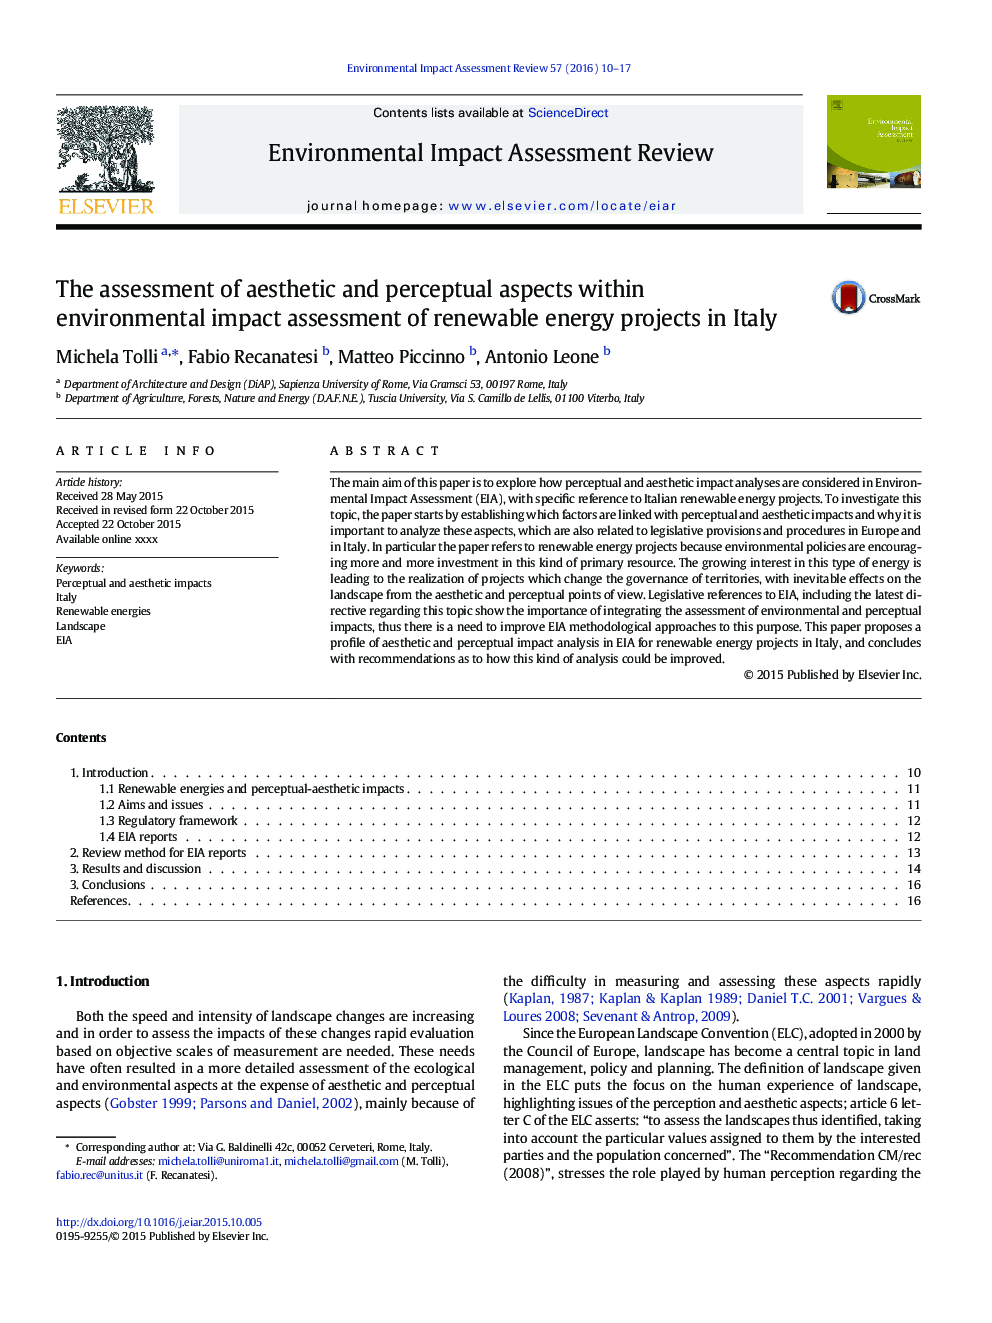 The assessment of aesthetic and perceptual aspects within environmental impact assessment of renewable energy projects in Italy